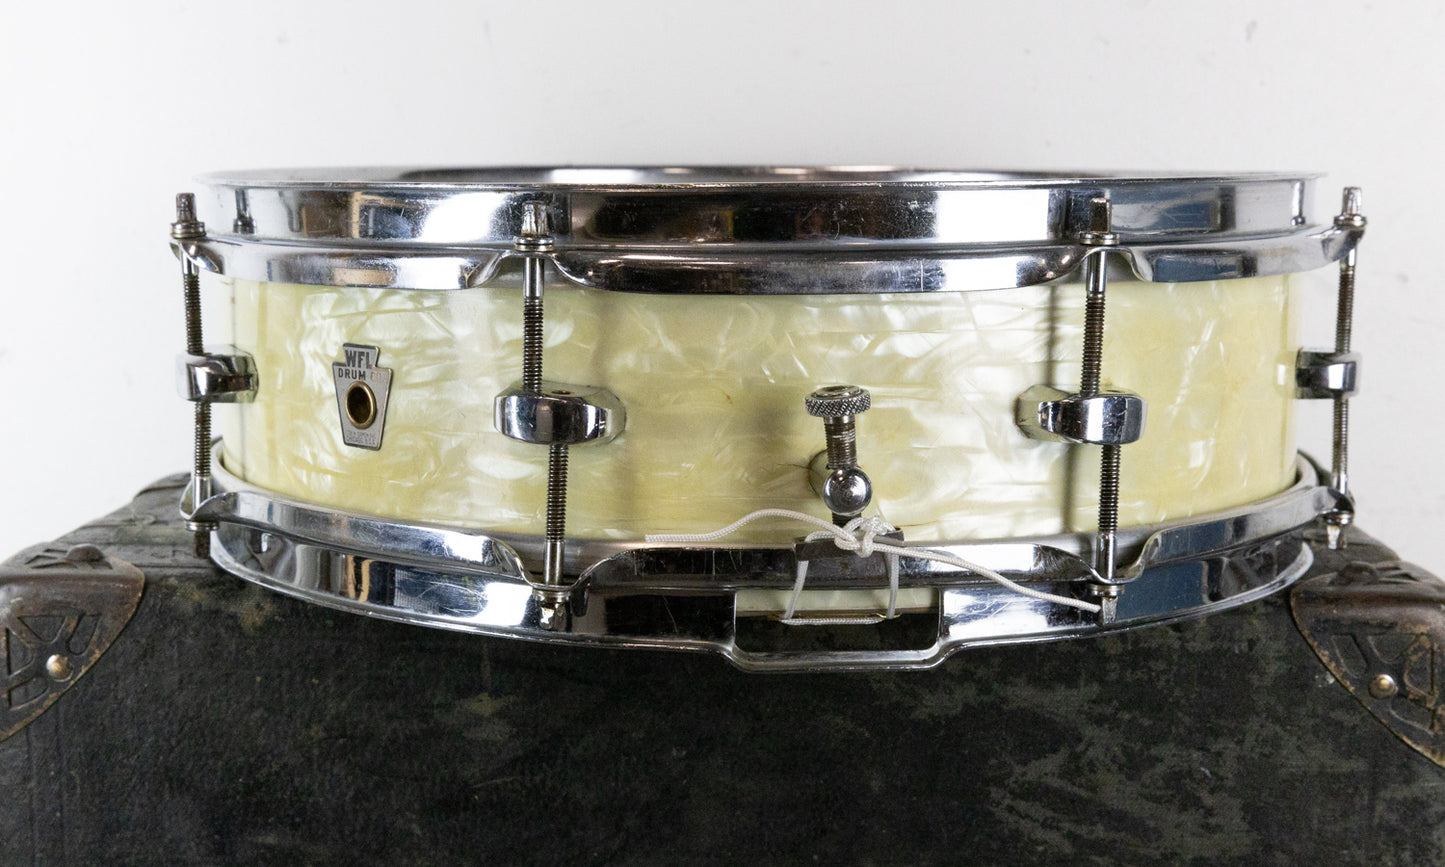 1940s WFL 4x14 "Buddy Rich Be-Bop" White Marine Pearl Snare Drum